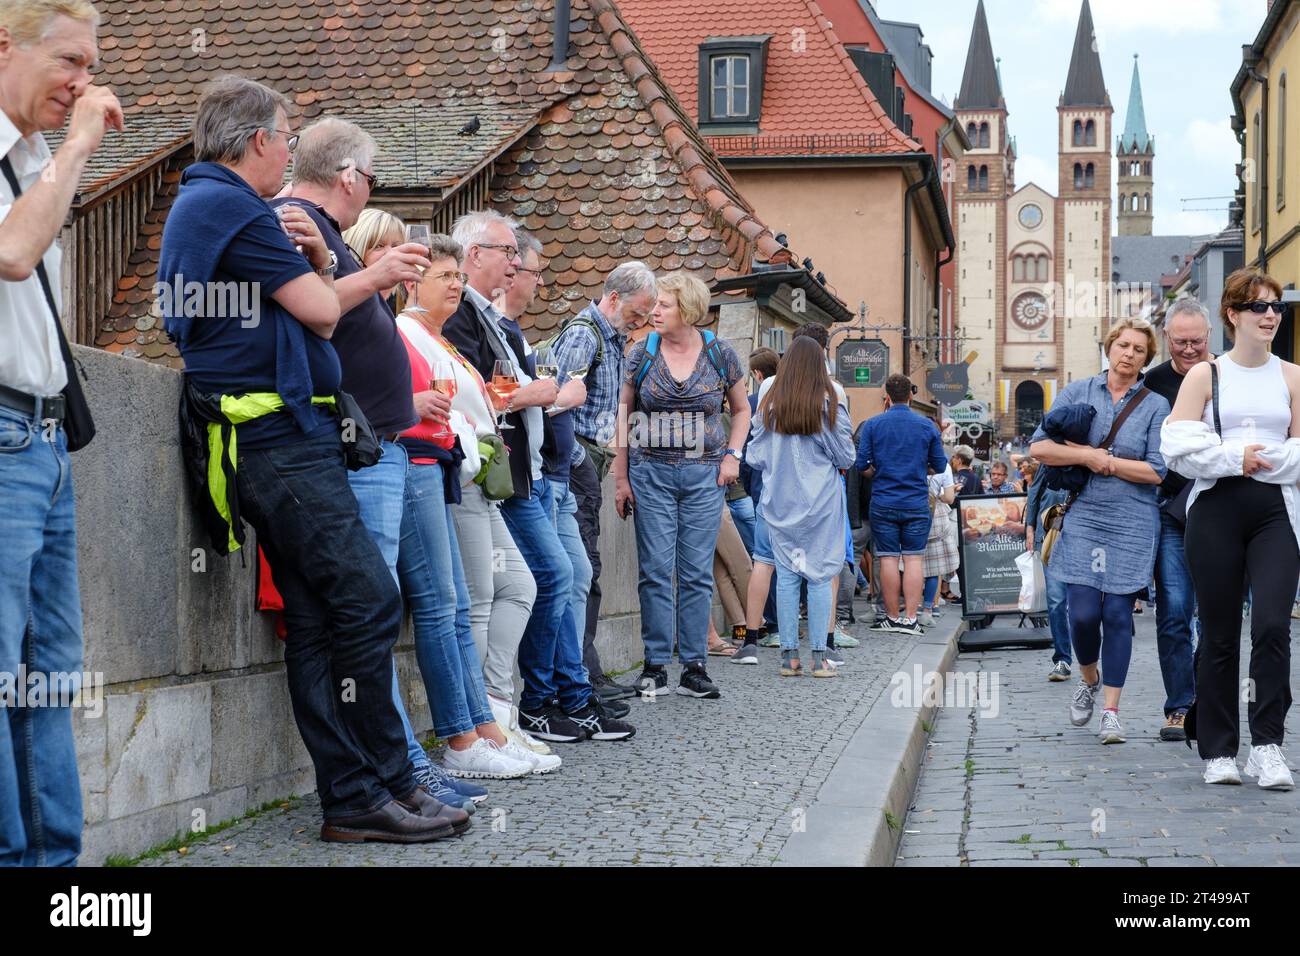 View of various visitors drinking wine at the Bridge alte Mainbrücke in Würzburg. Stock Photo